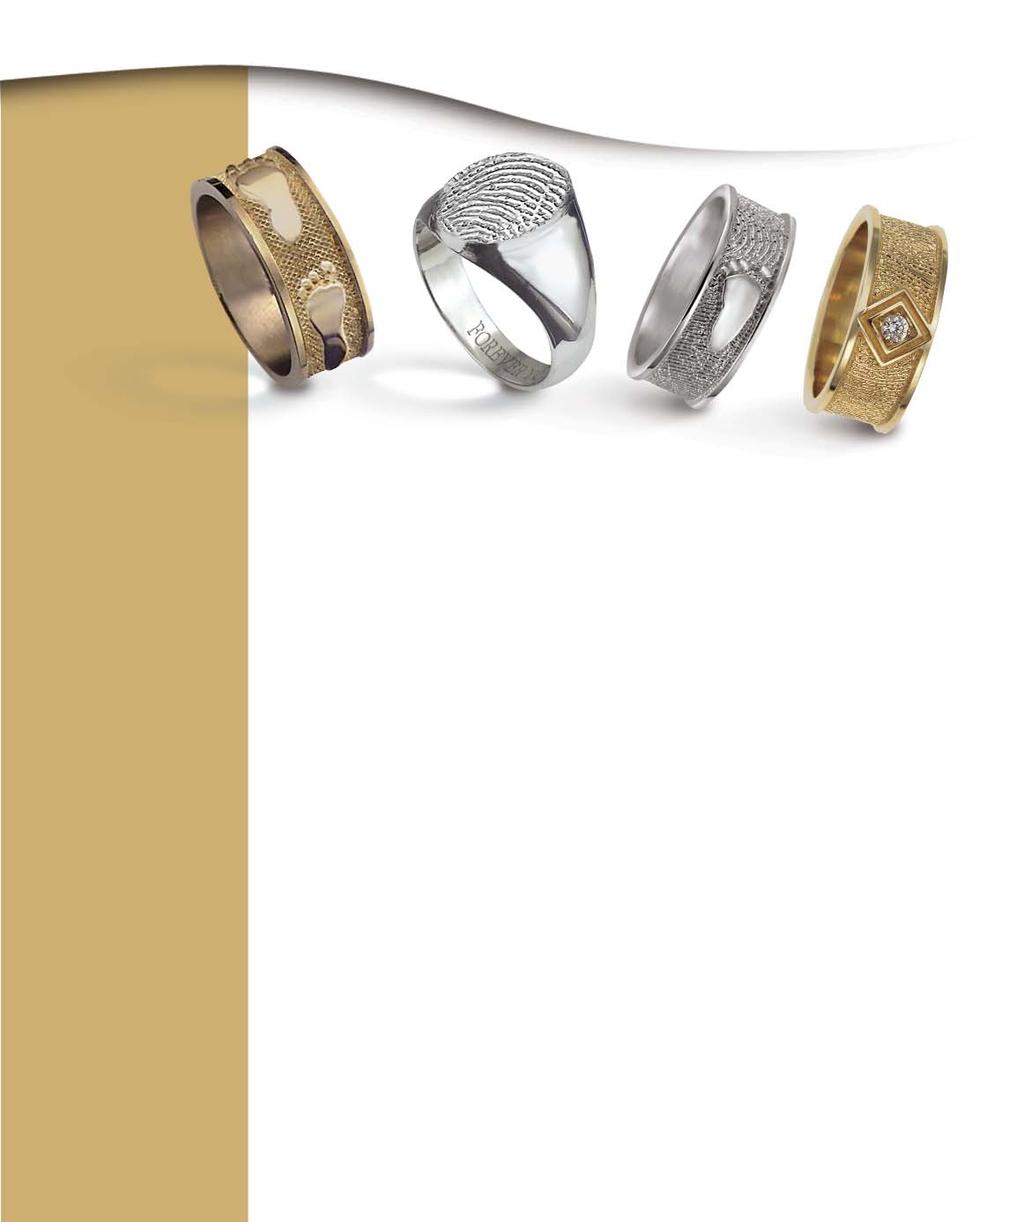 Our Rings Rings have long expressed important emotions, traditions and relationships.